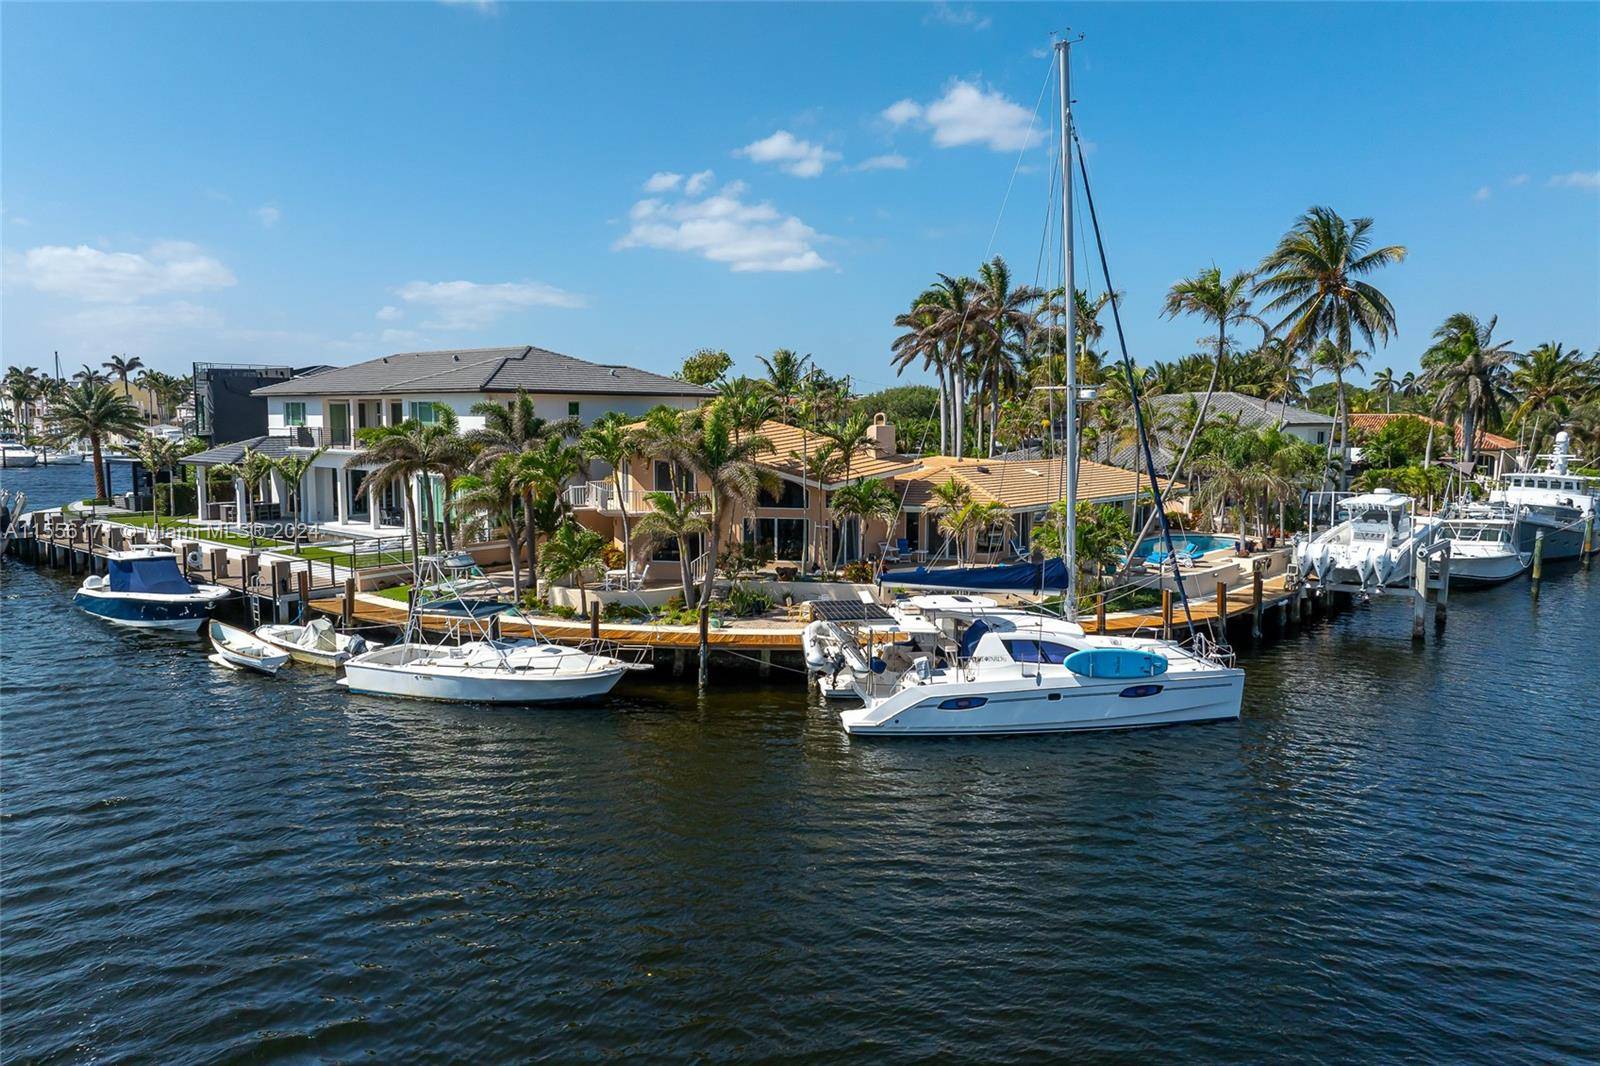 This inimitable east facing waterfront property located in the picturesque community of Lighthouse Point offers unparalleled water frontage and access to Hillsboro Inlet and Marina.